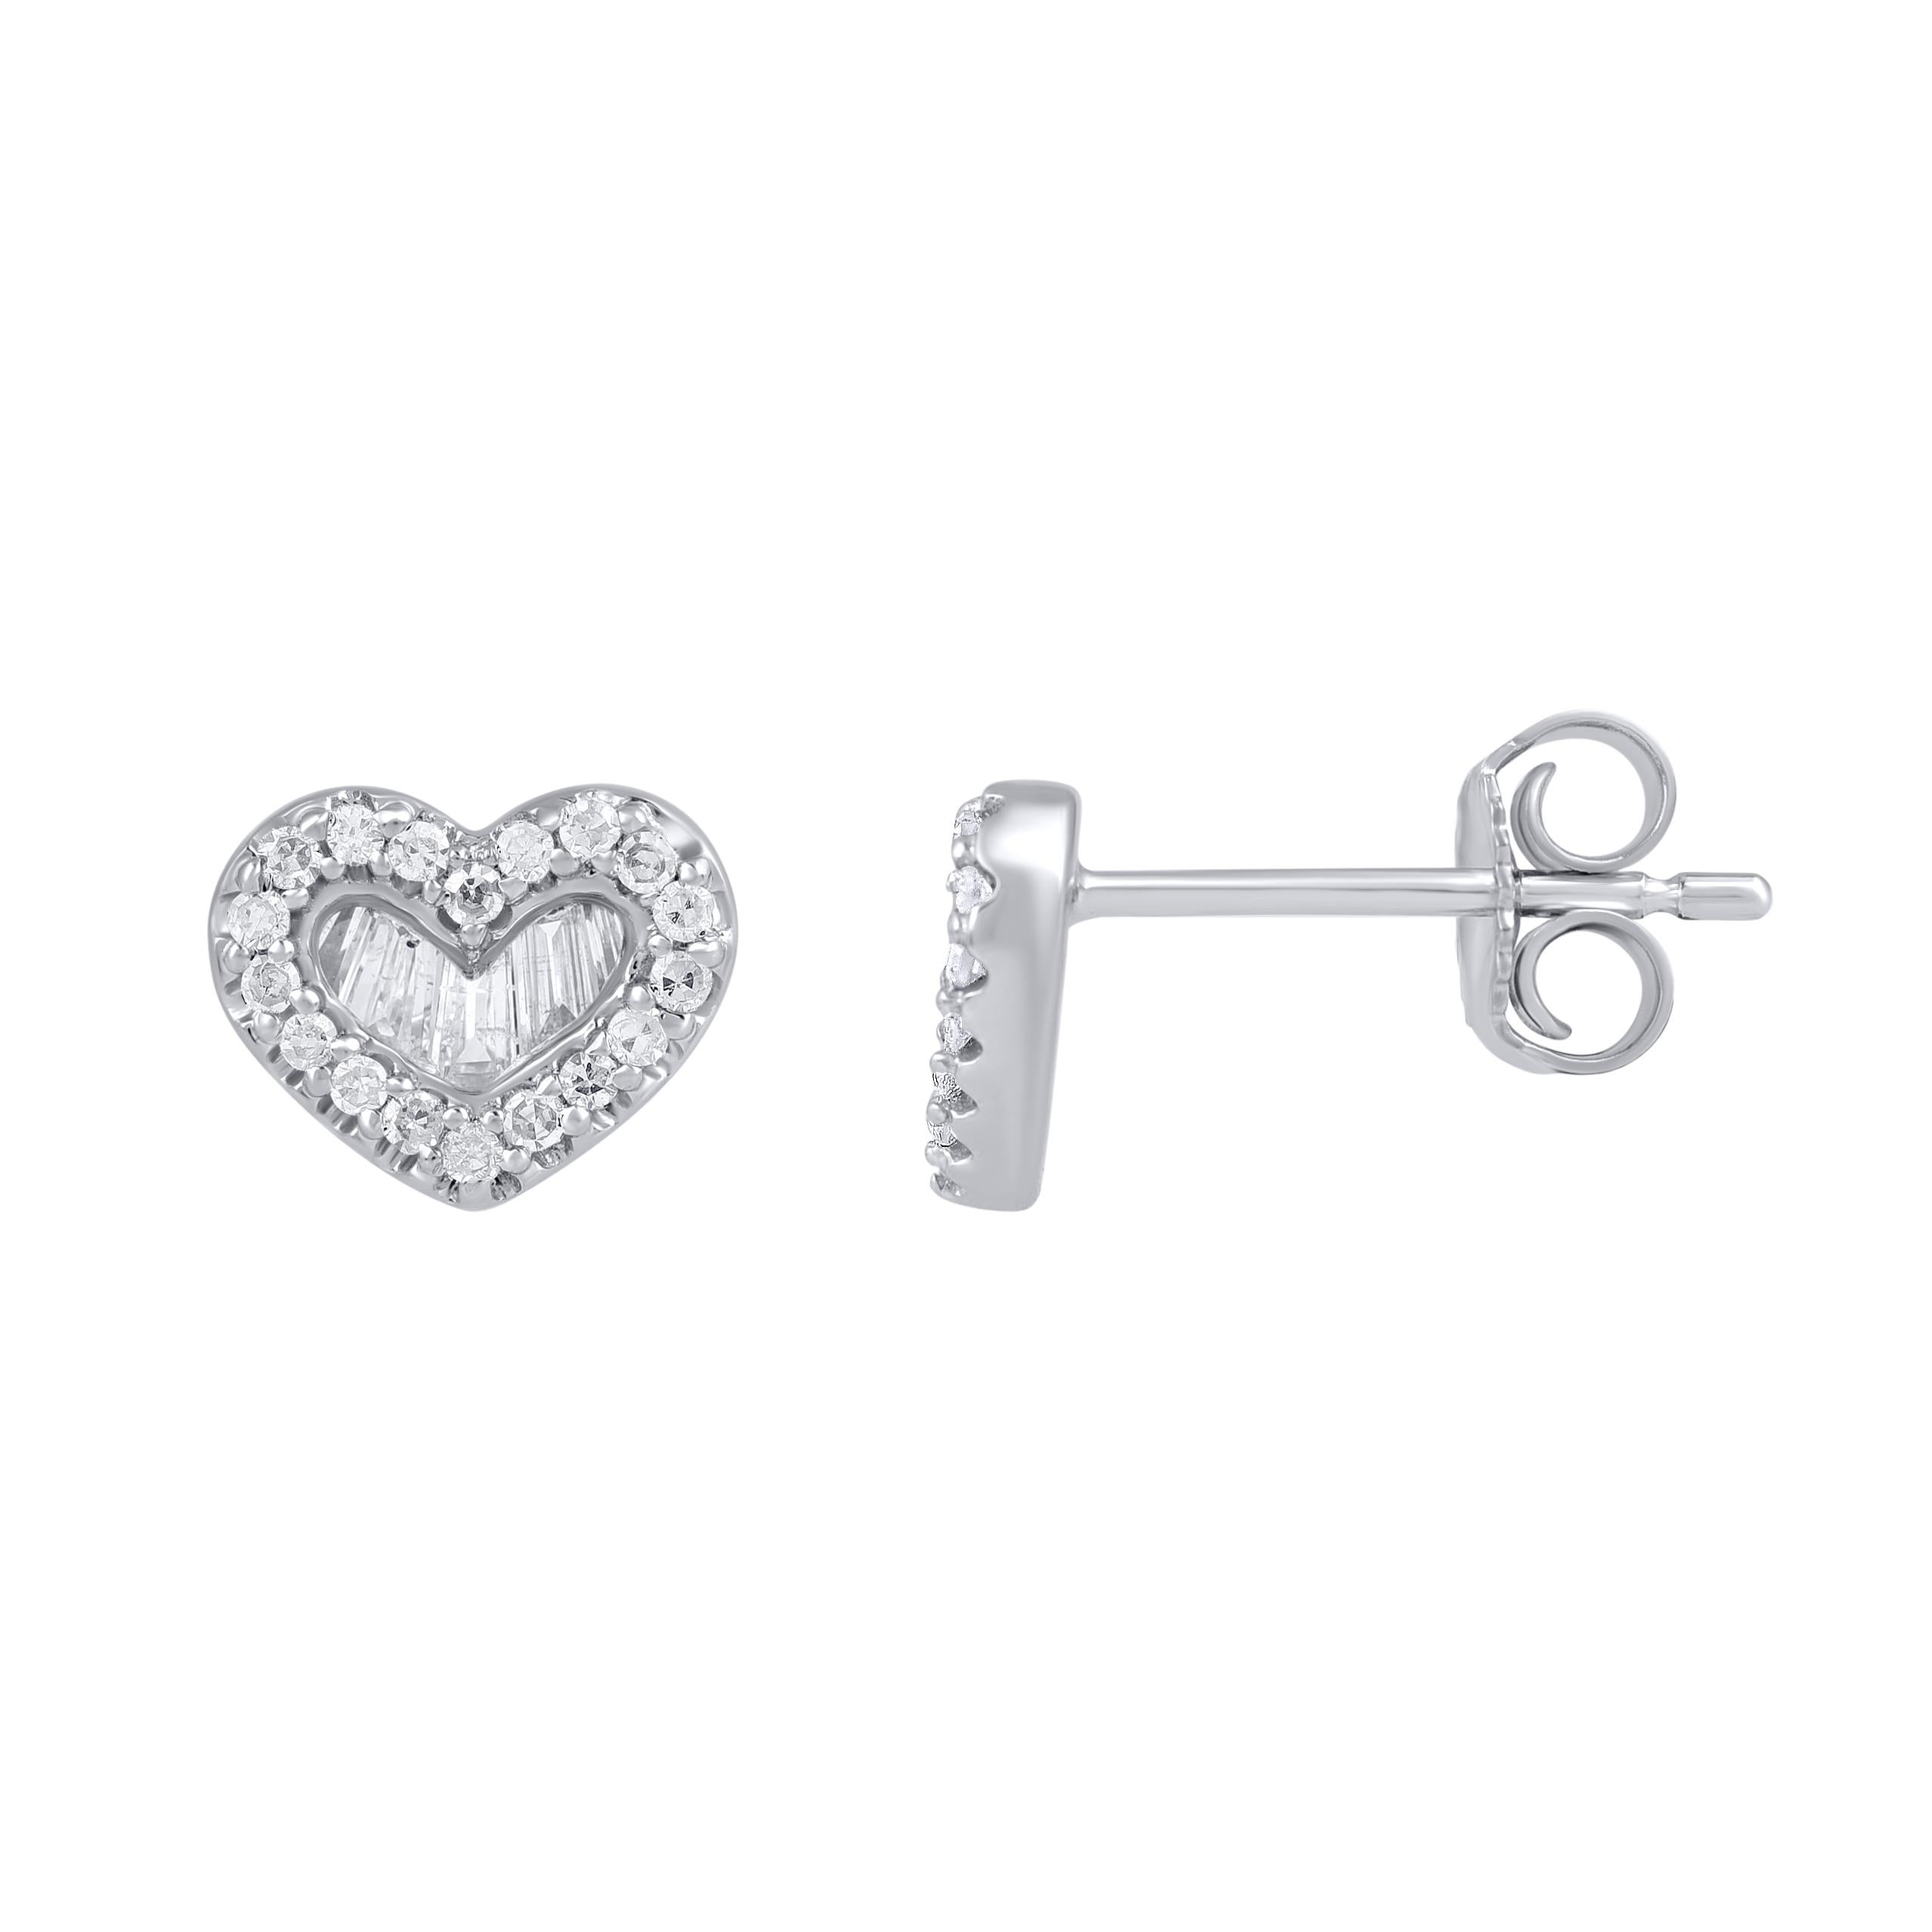 A sparkling delight, these diamond heart stud earrings fit her charming aesthetic. Handcrafted by our experts in 14 karat white gold and studded with 46 single cut and baguette-cut diamond set in prong and channel setting, glitters in H-I color I2